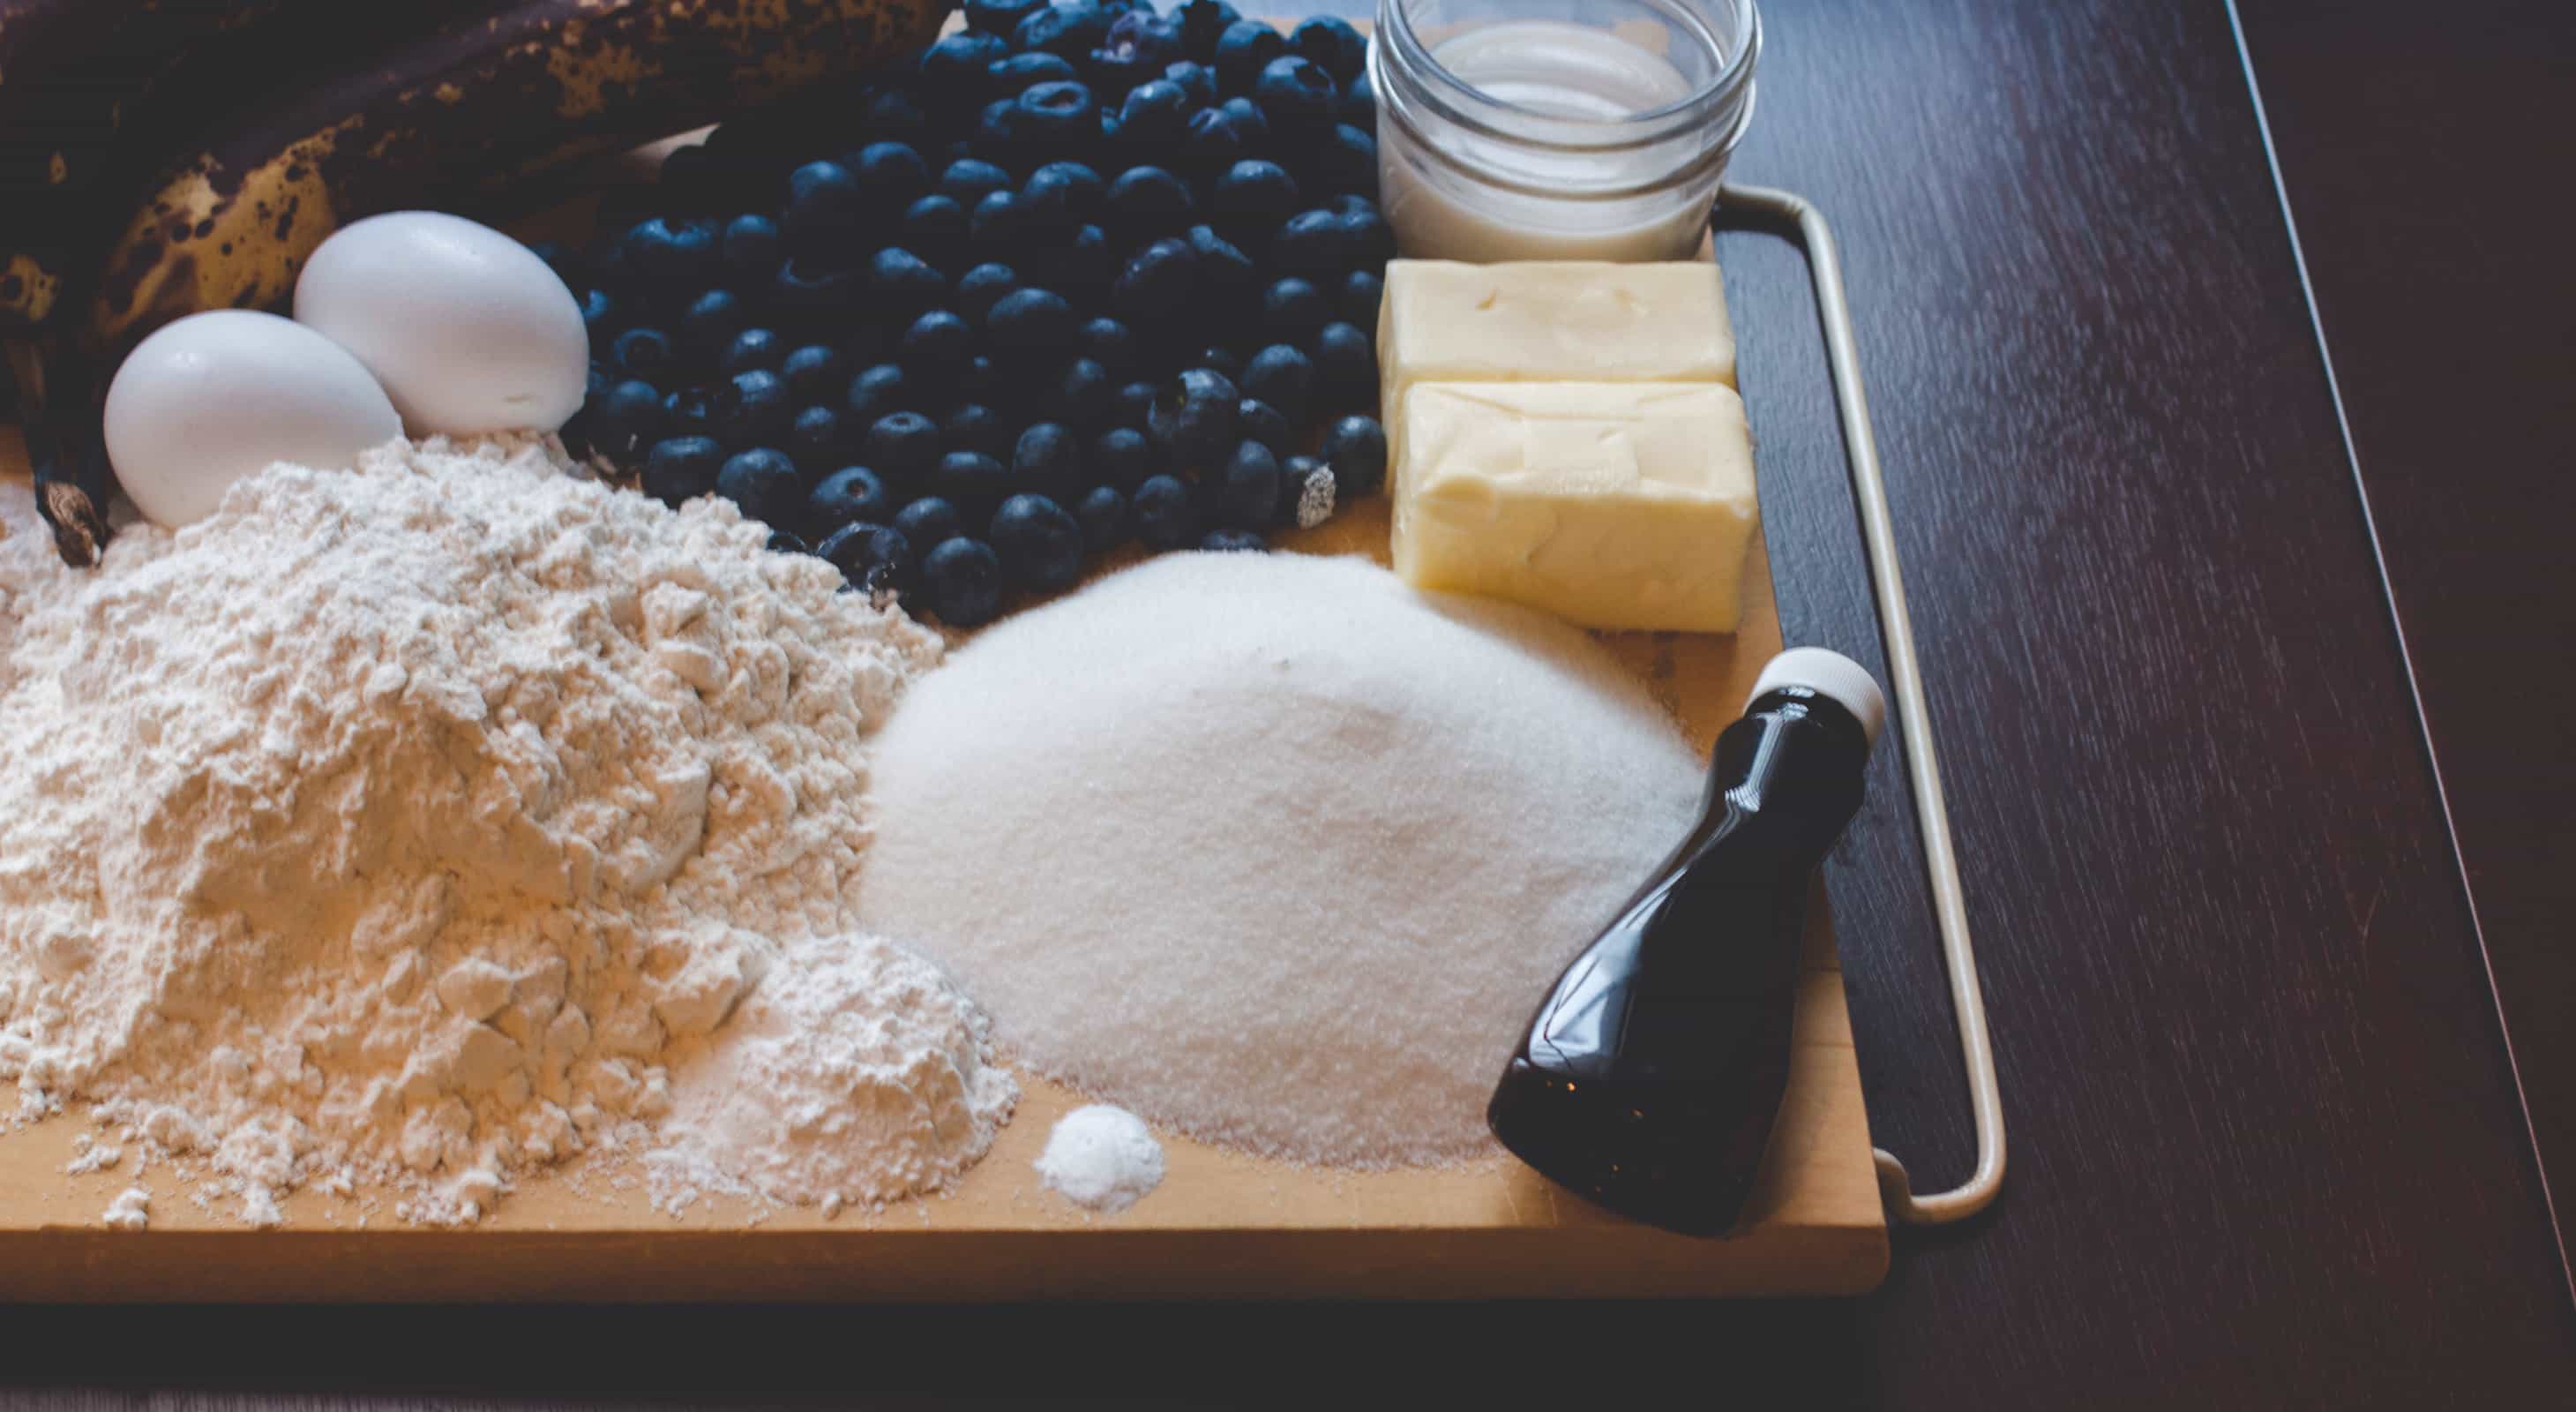 Baking ingredients and blueberries on a tray